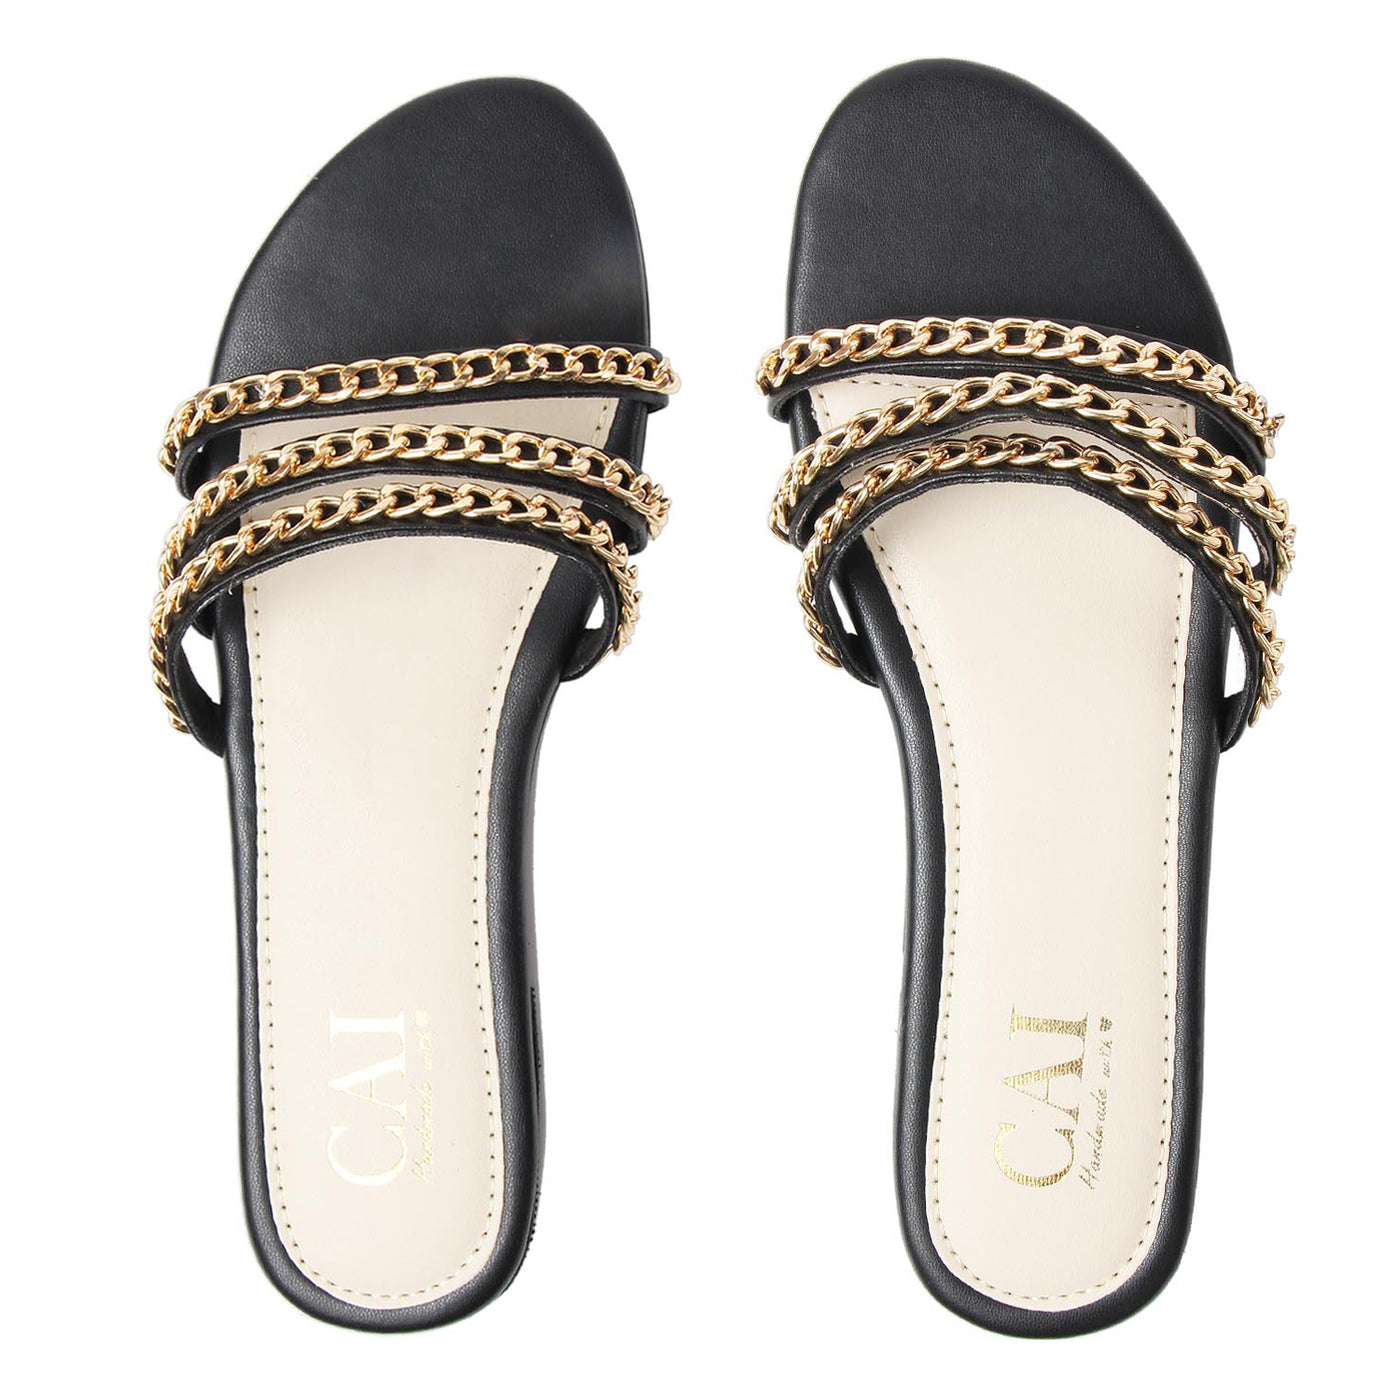 Slip on Flats: Buy Black Chain Open Toe Flats Online in India – The CAI ...